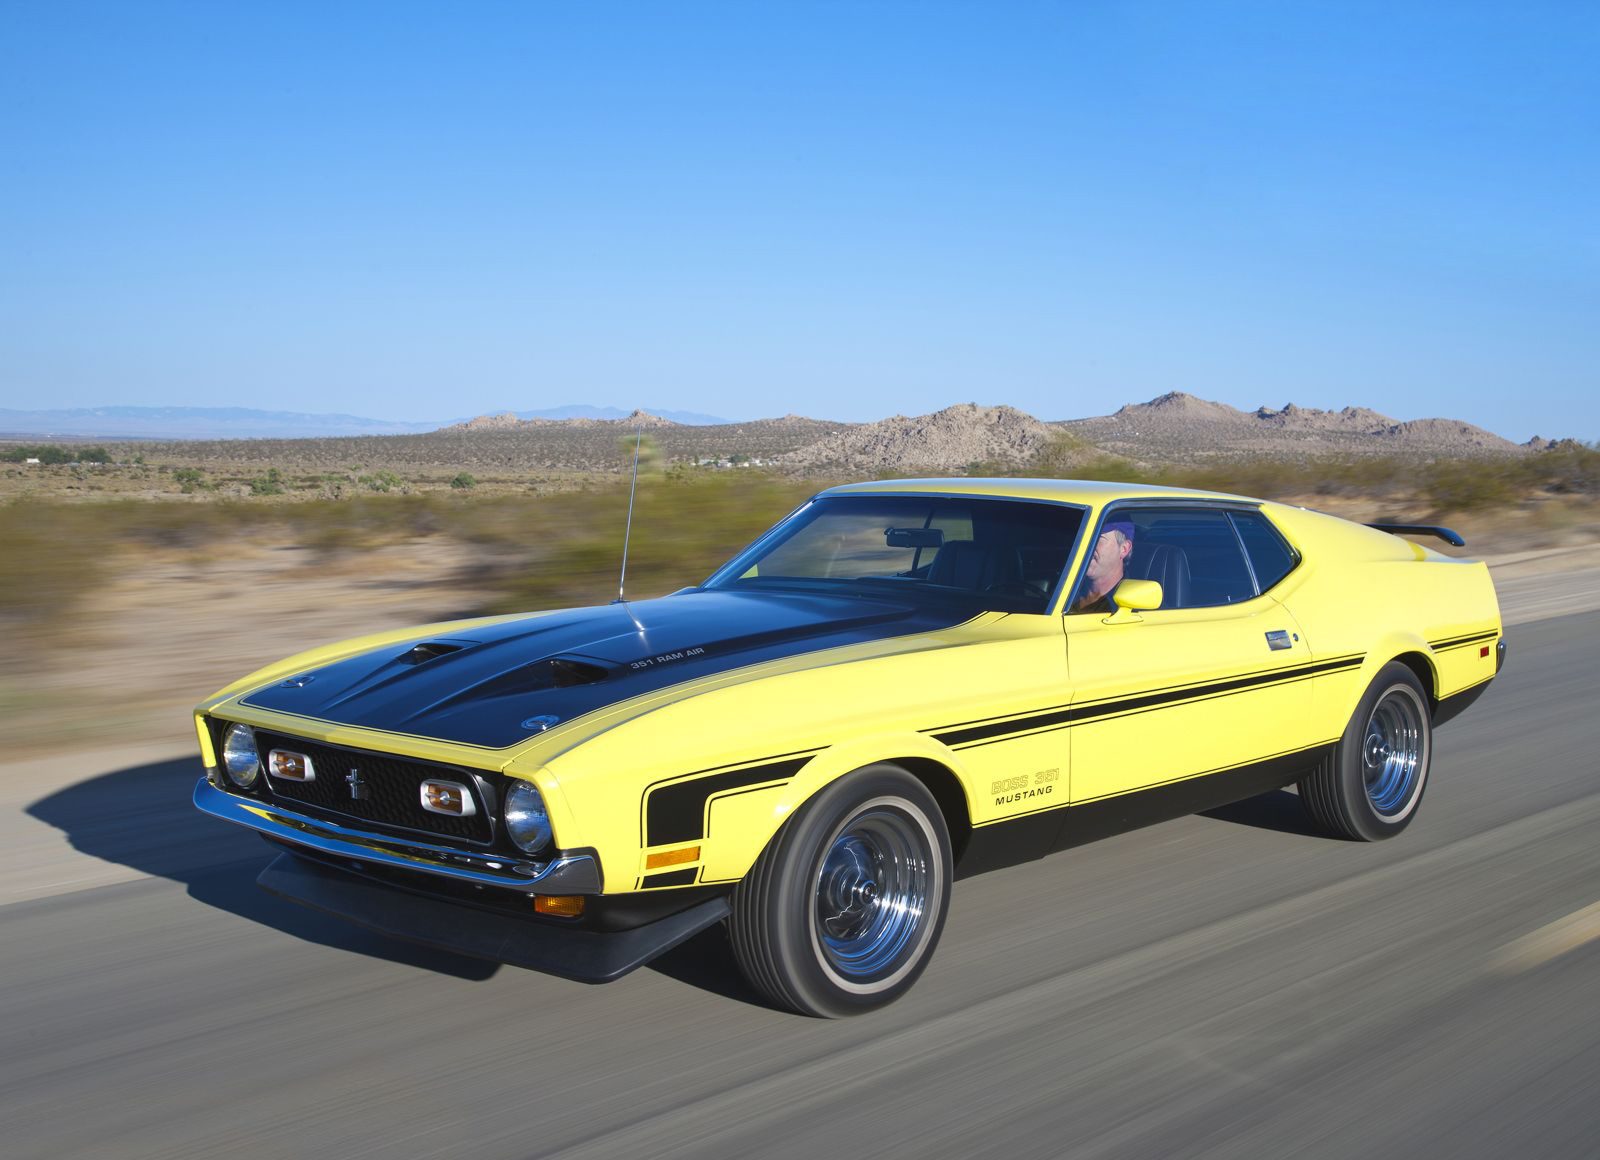 Mustang Of The Day: 1971 Ford Mustang Boss 351